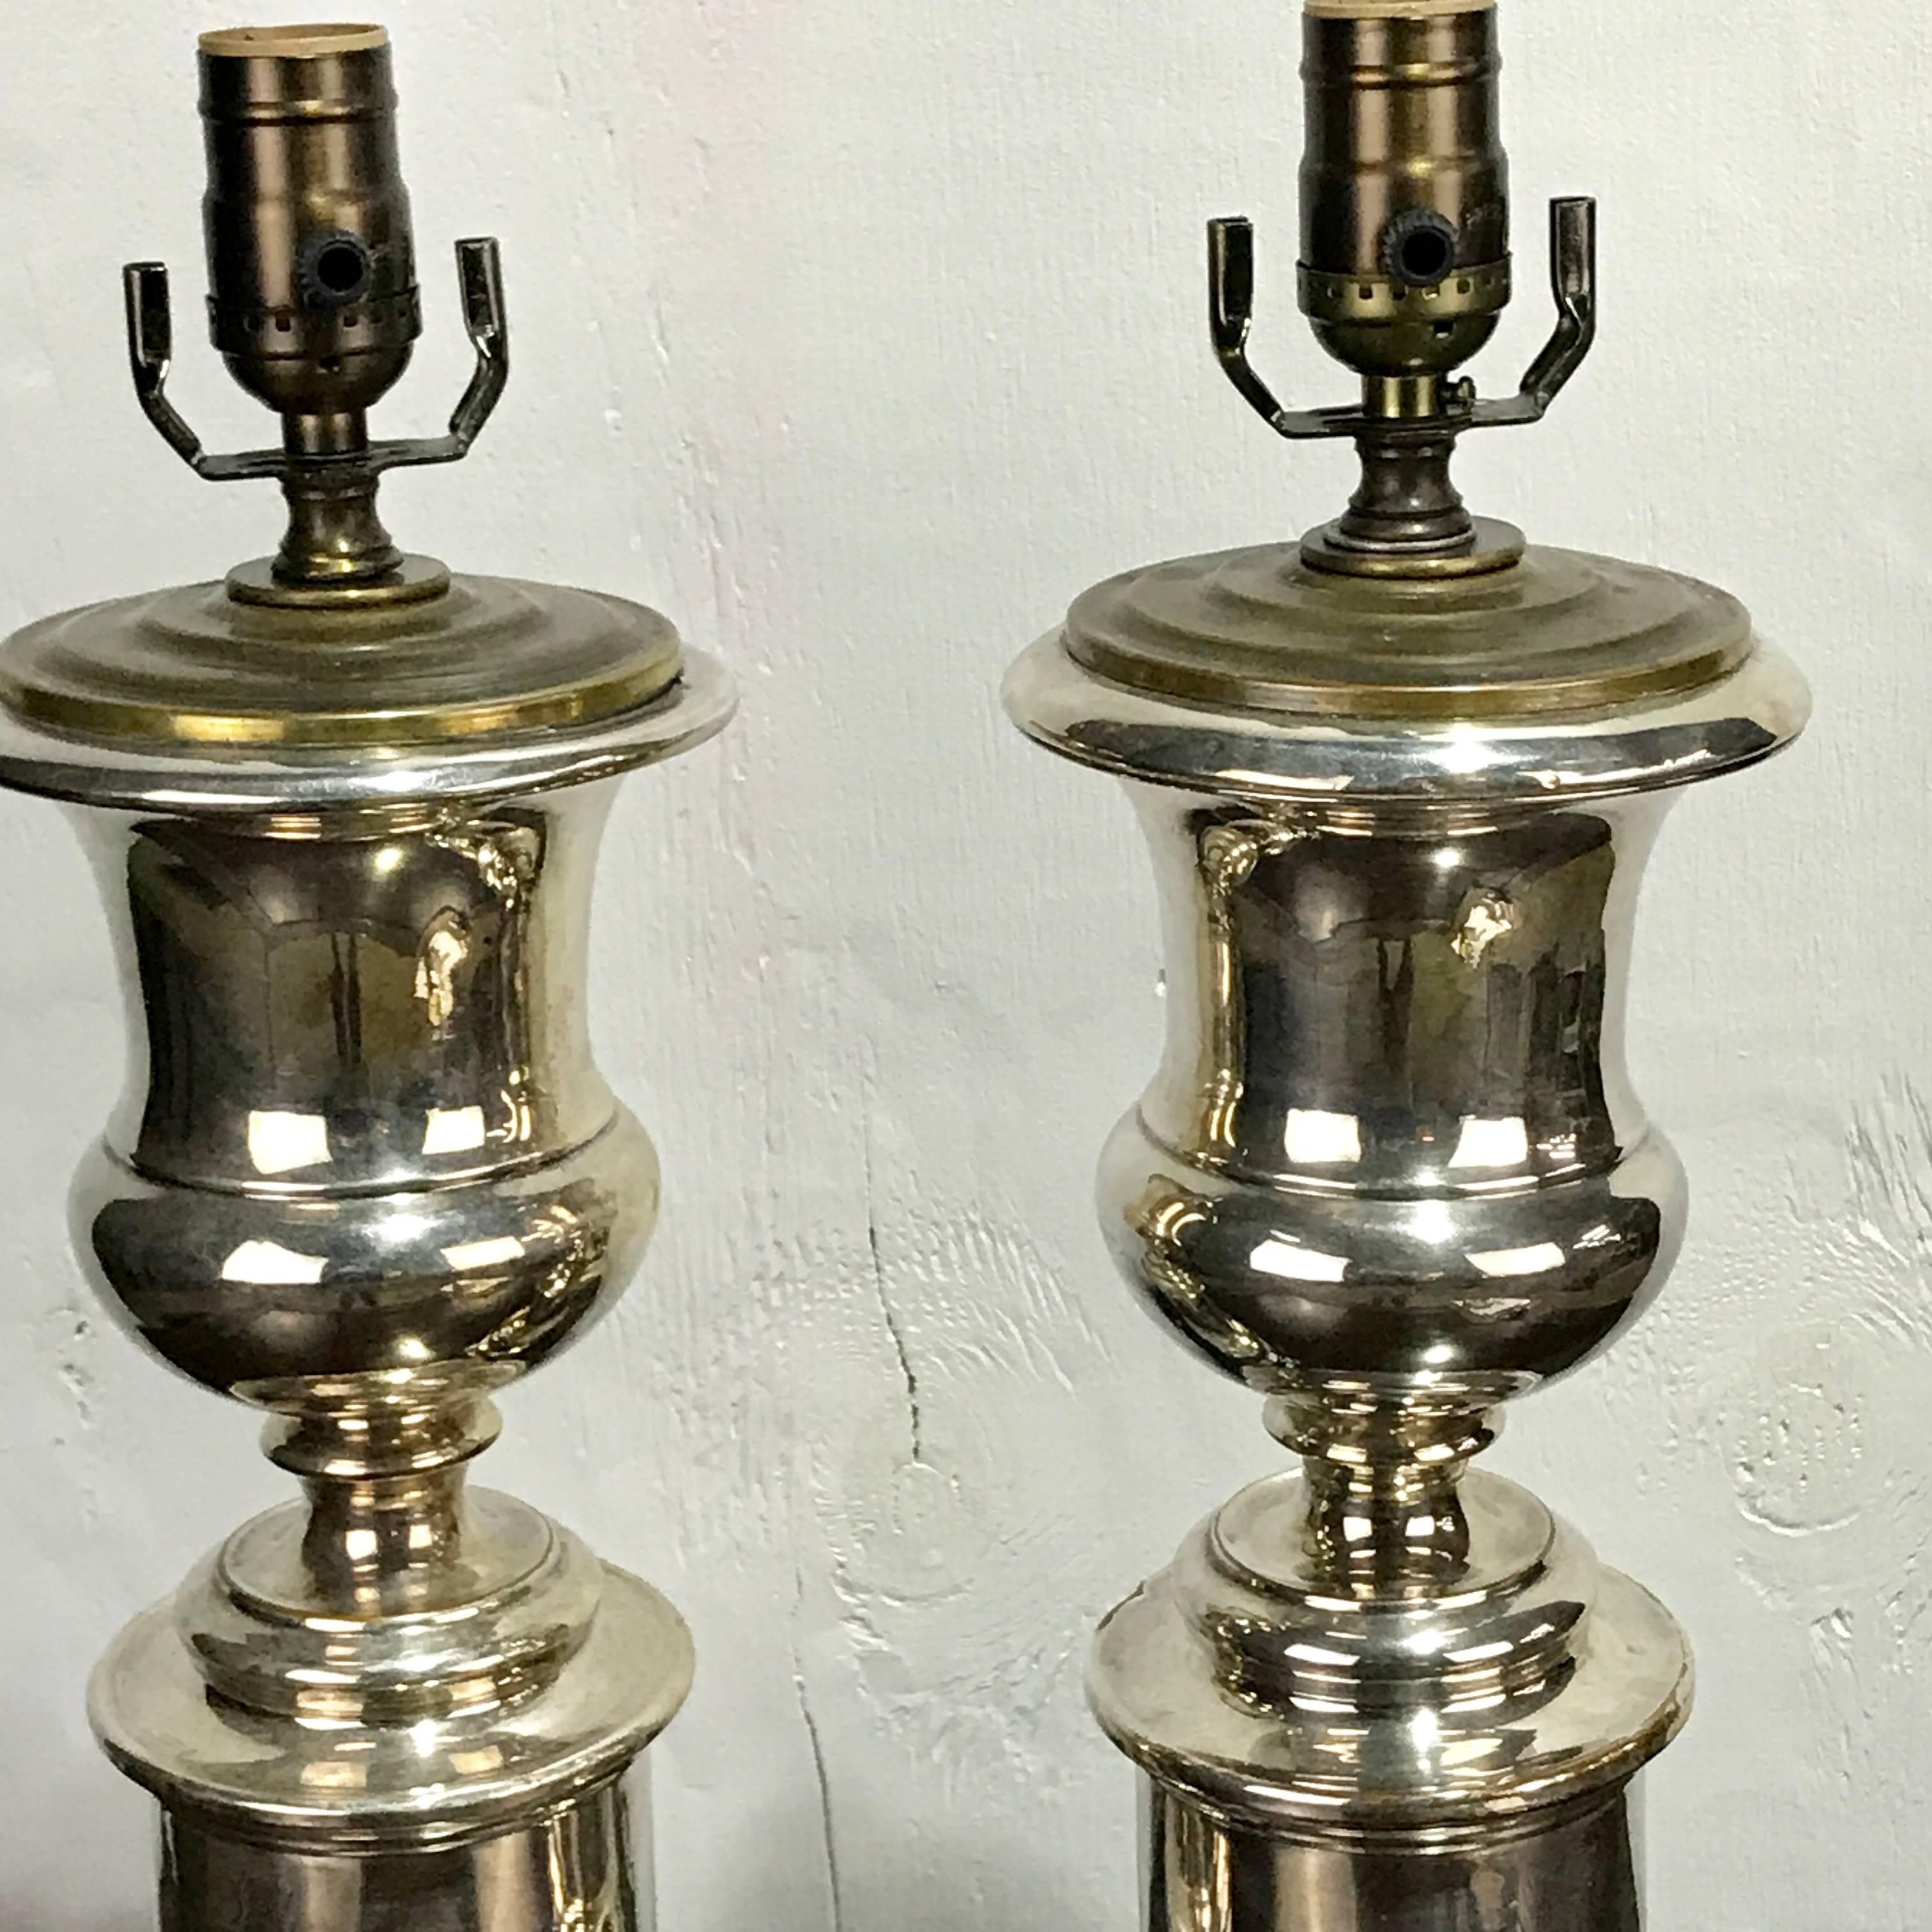 Regency Revival Pair of English Regency Silver Plated Urns Now as Lamps